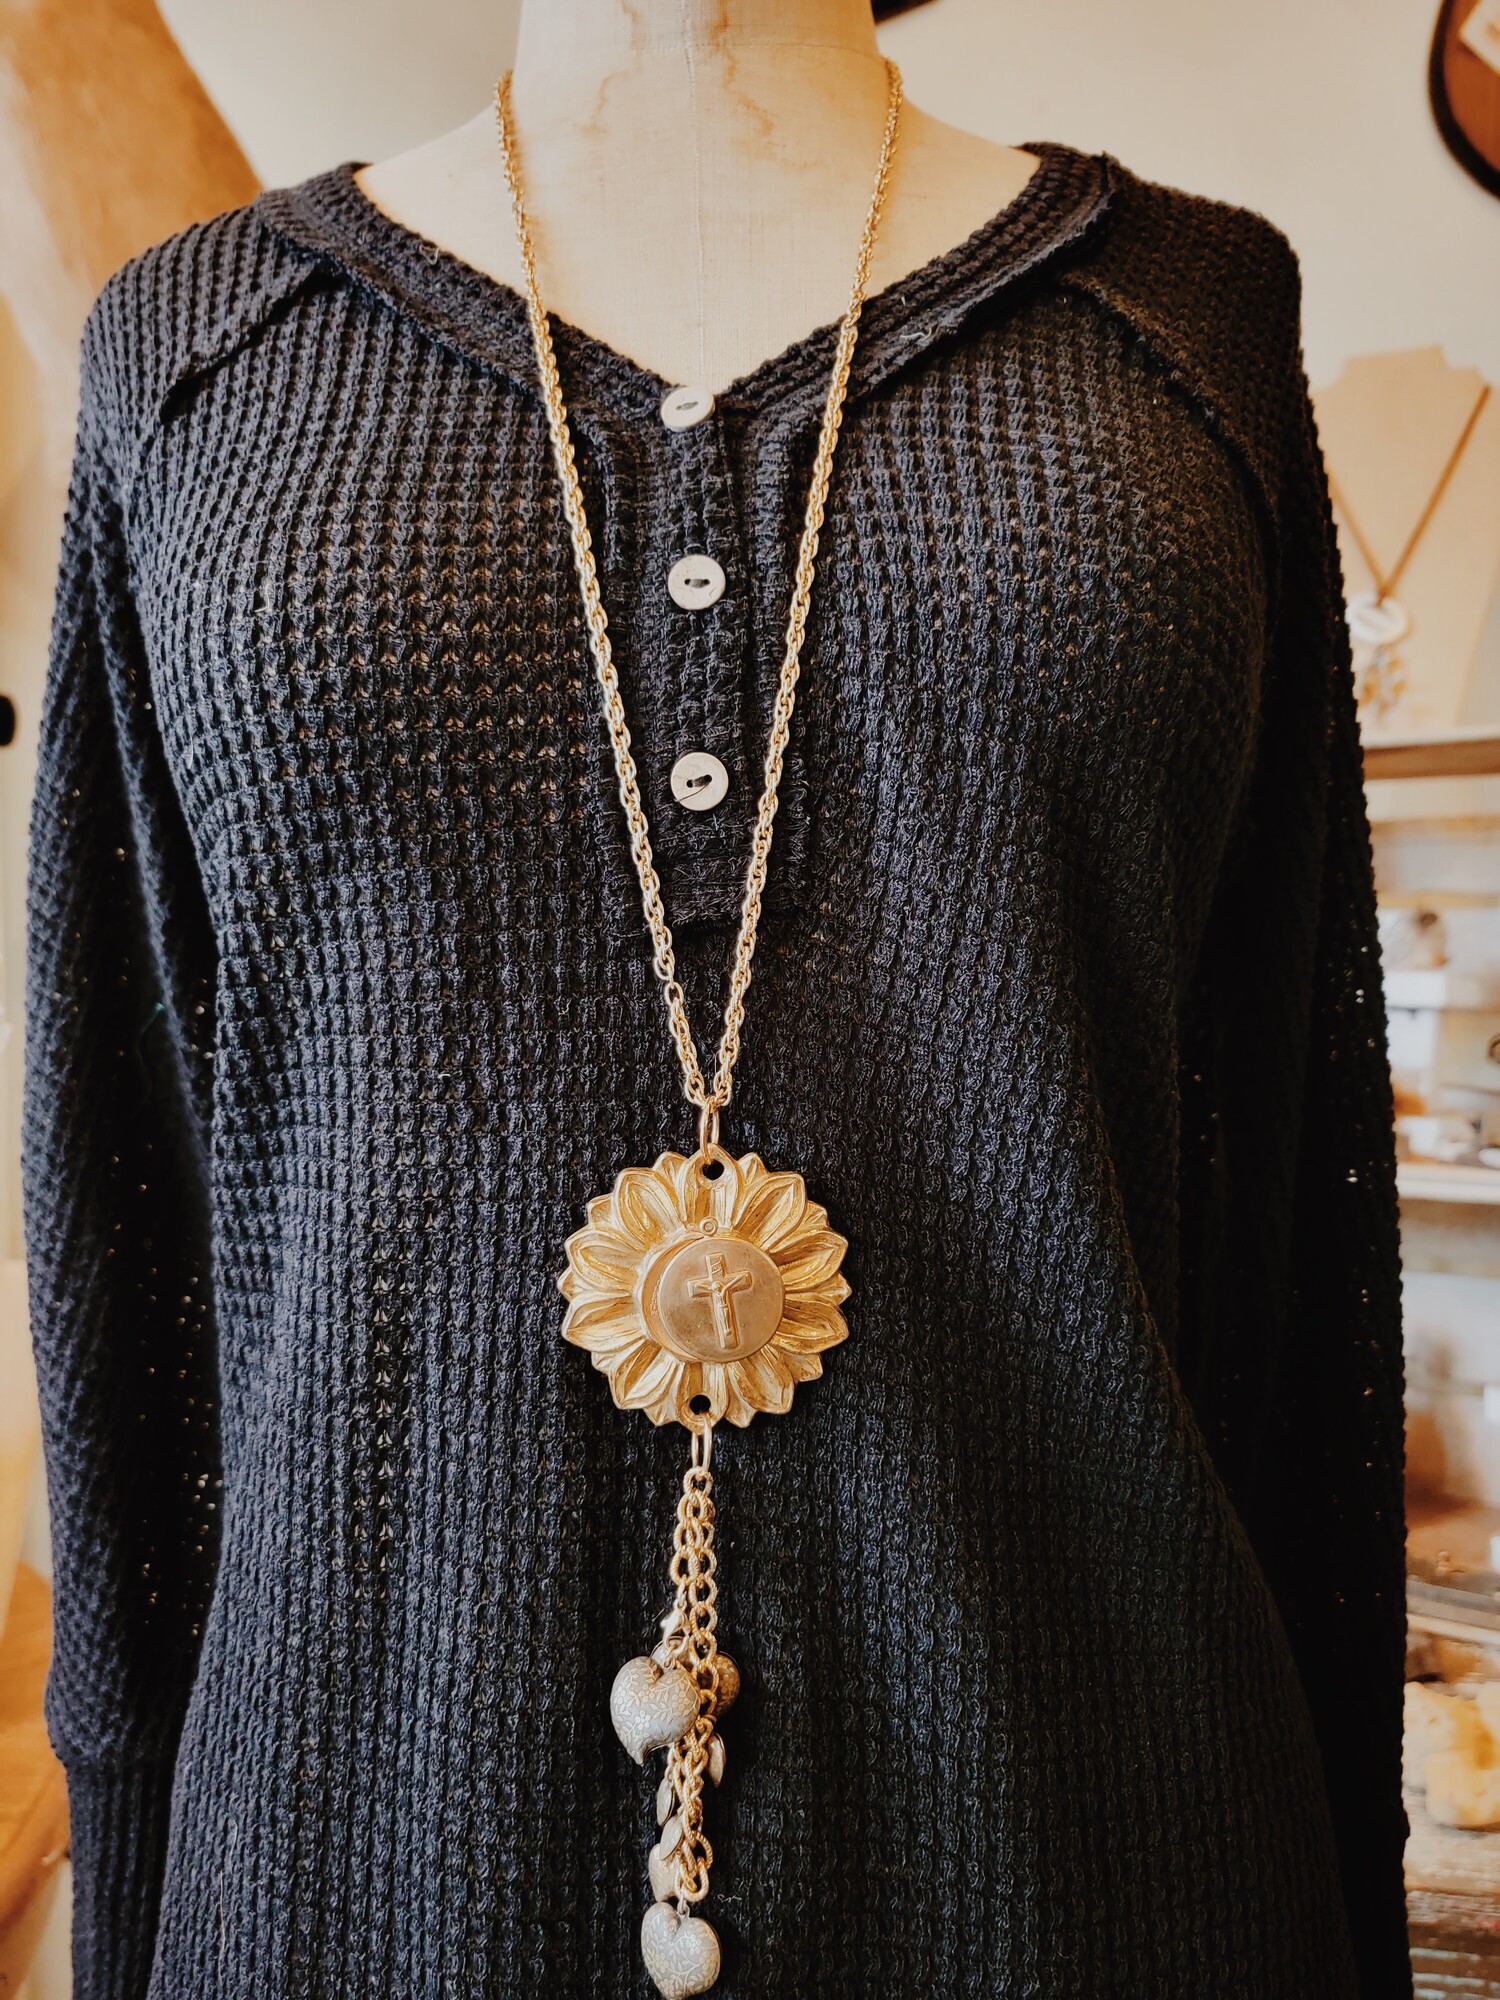 This unique necklace is definitely one you will want to snag before it is gone! The artist that hand crafted it used a vintage floral medallion as the pendant and attached a locket to the front that opens and reads The Lord's Prayer inside.
Chain: 34 Inches